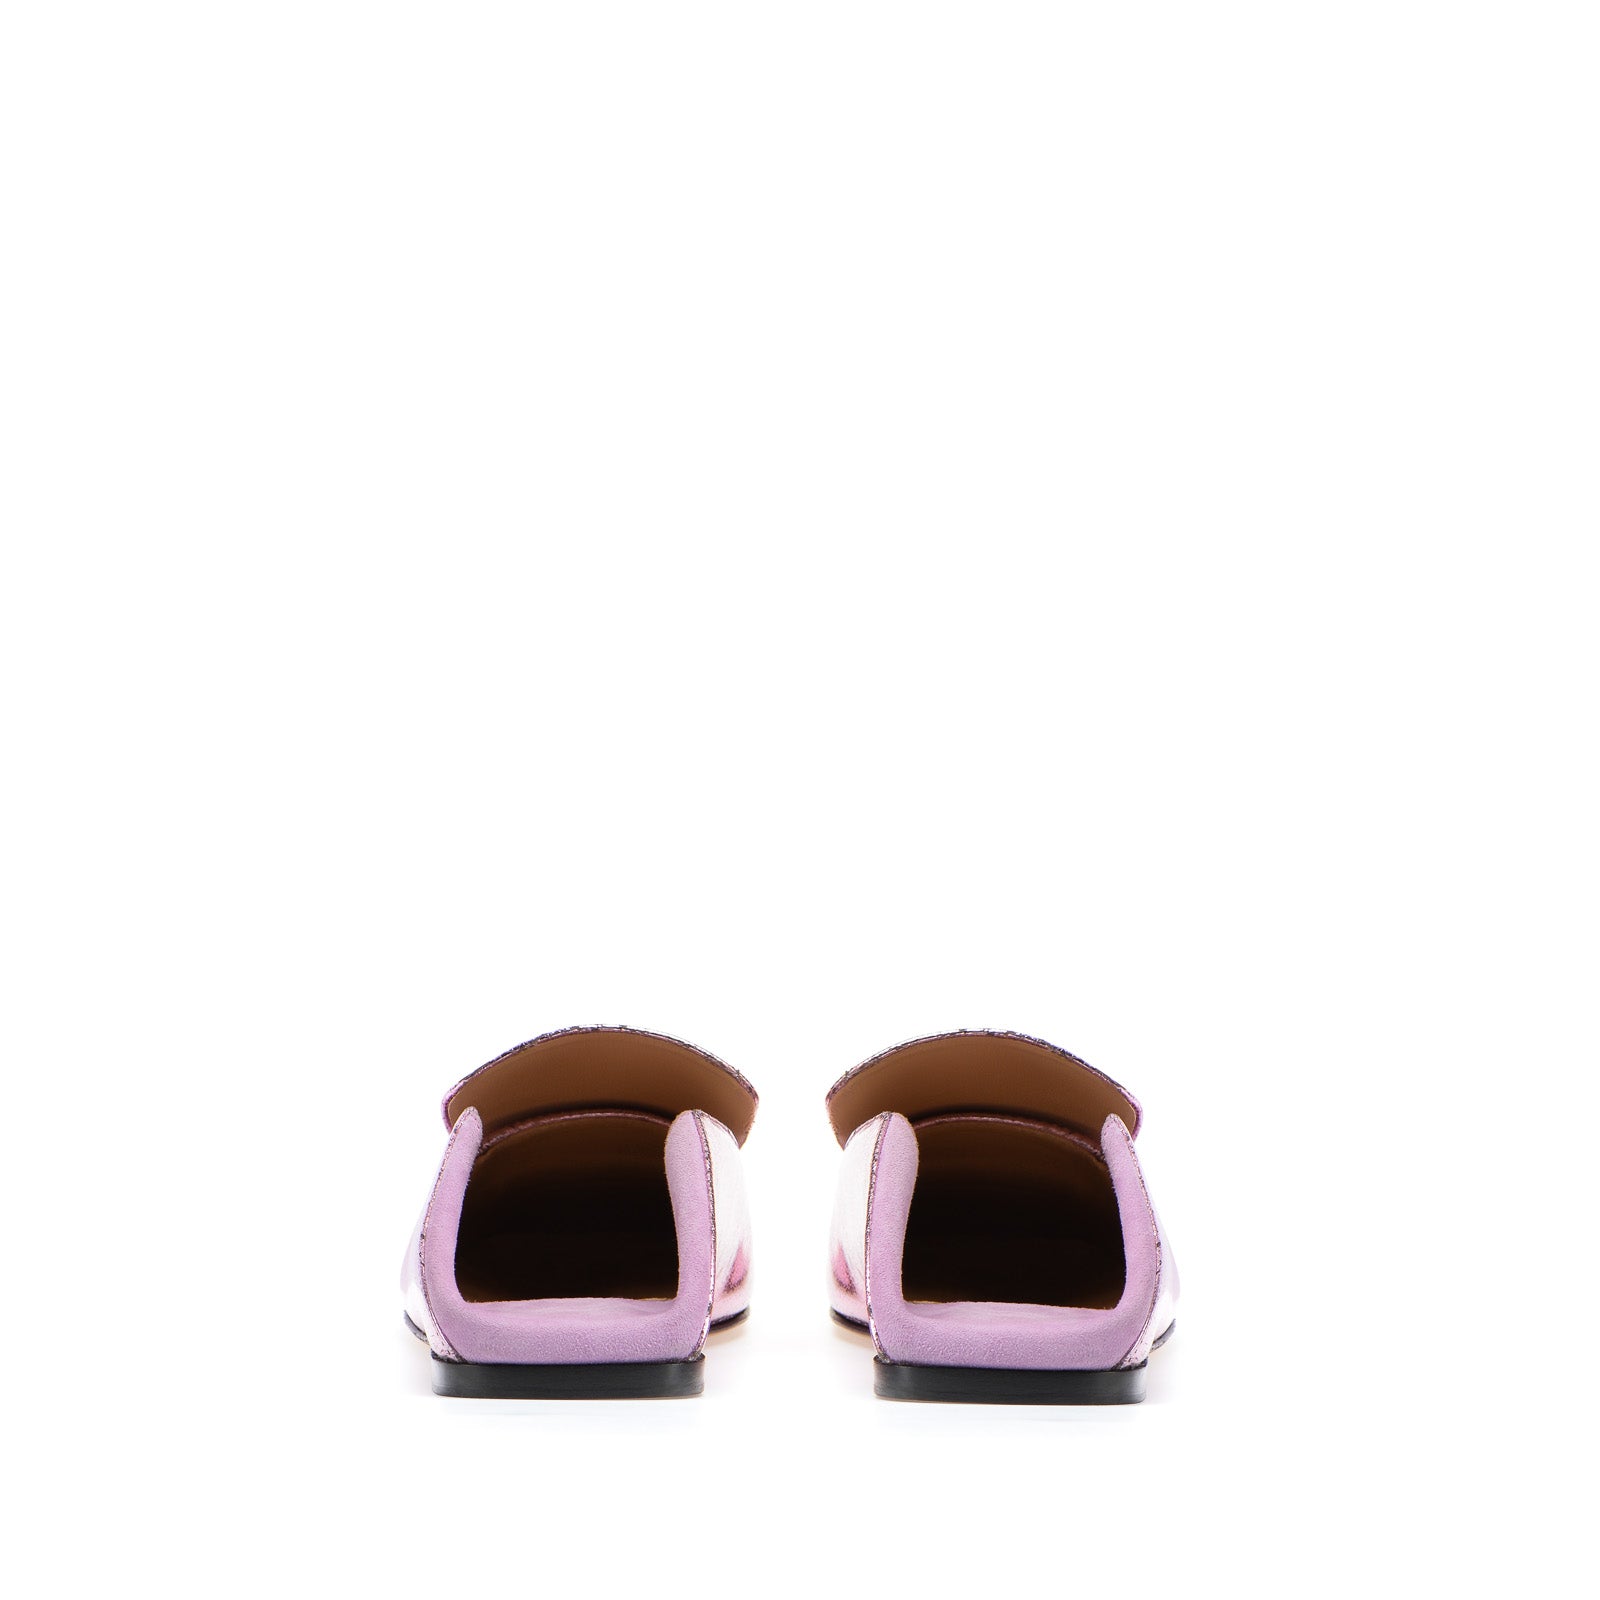 Sr1 loafers - Peonia Delicate